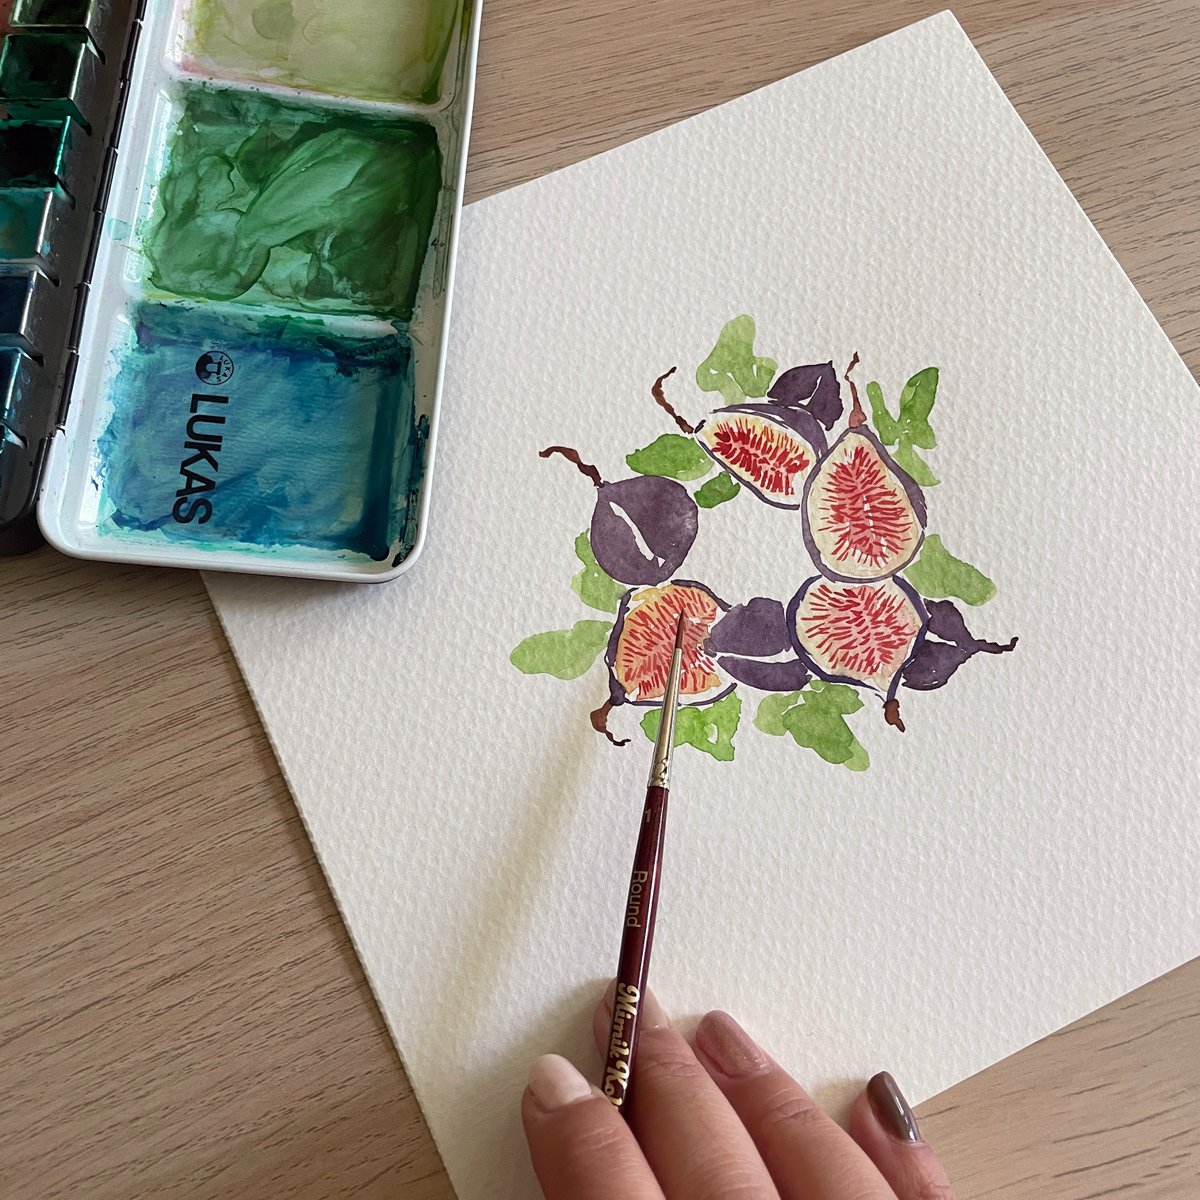 Don't forget to sign up for our newsletter to receive the latest product releases, collaborations with artists and much more!

Sign up via our website.

Image credit: AudreyRa #JerrysArtist

#LukasFarben #LukasColor #LukasPaint #WatercolorArtist #ArtSupplies #WatercolorPaint